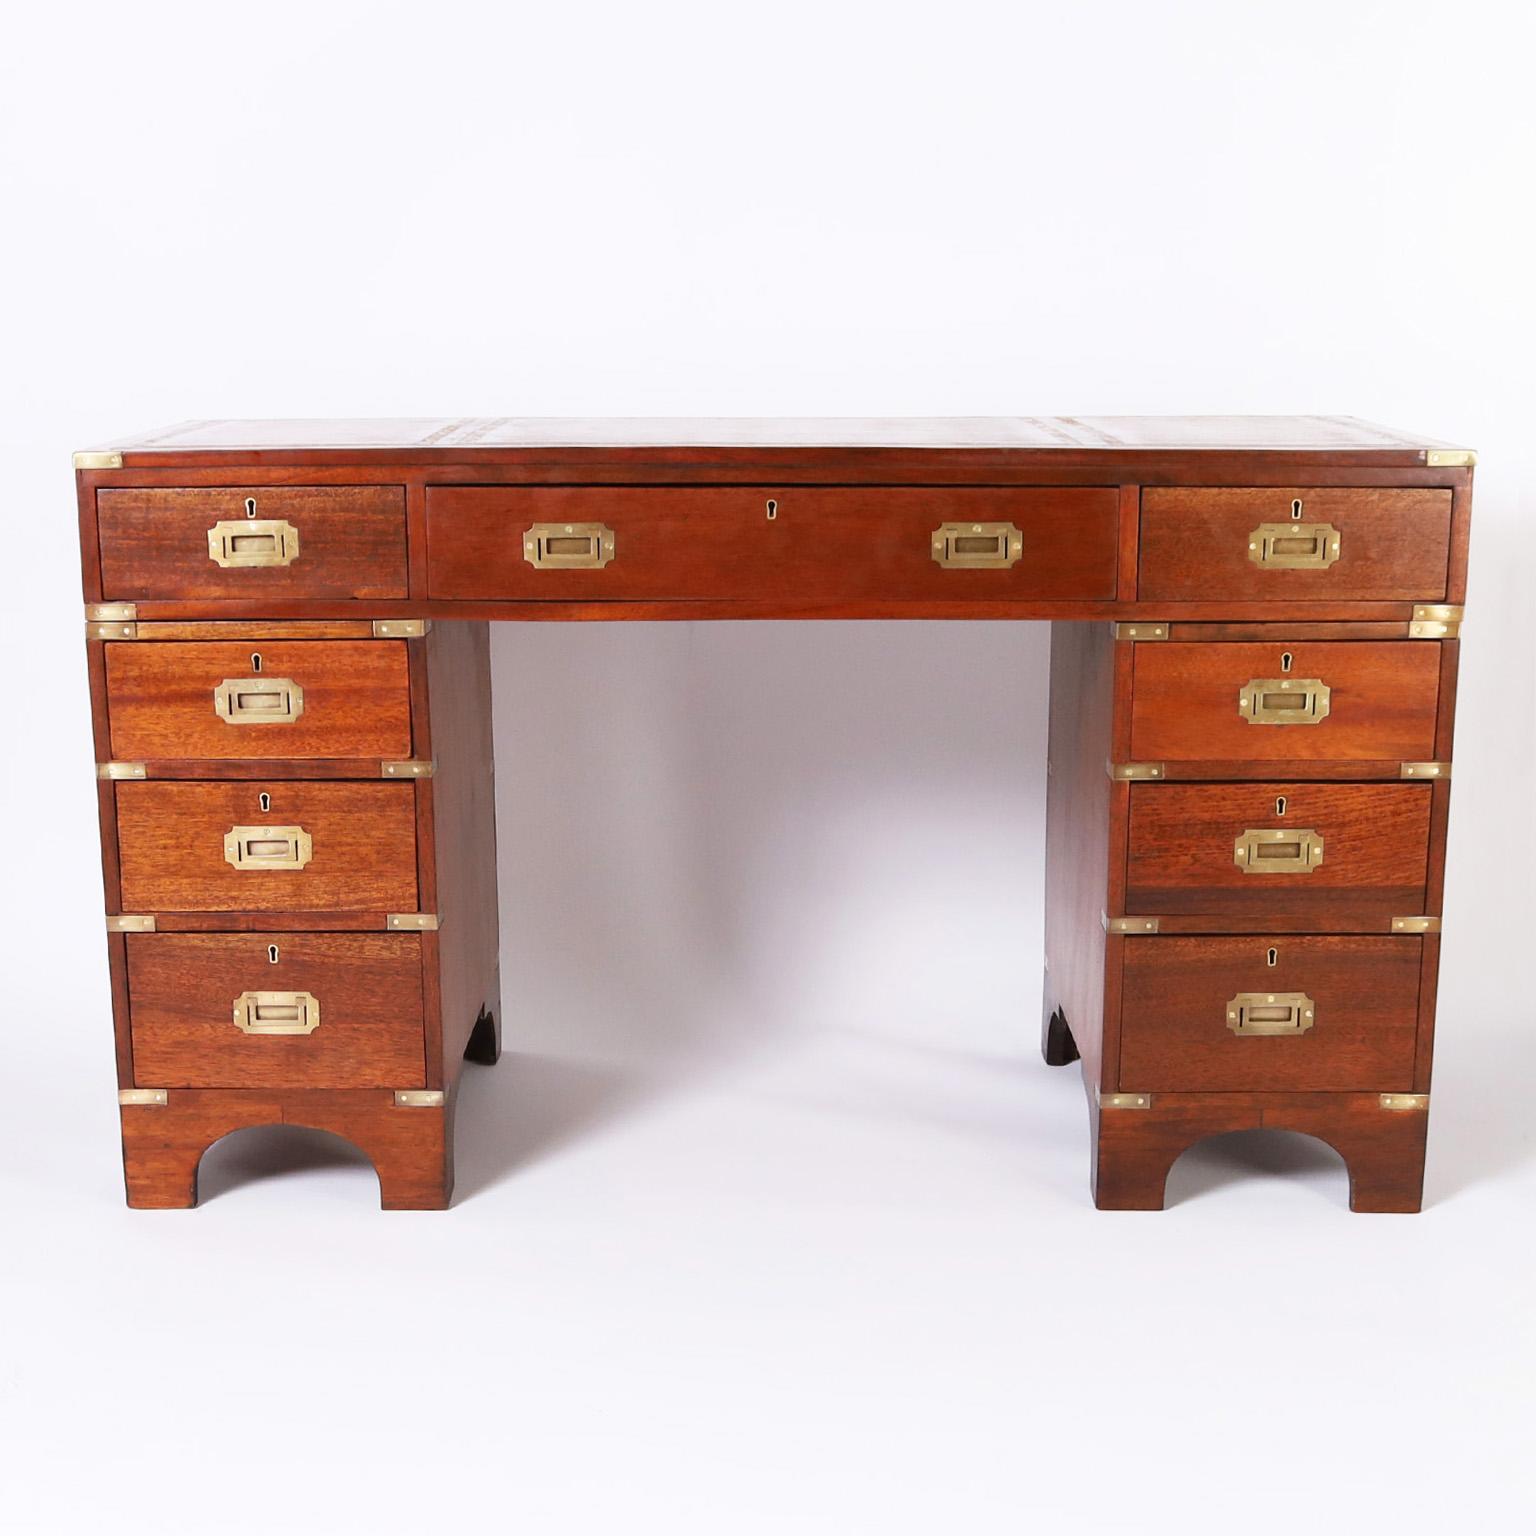 Handsome antique English British Colonial campaign desk crafted in mahogany, in three pieces, with a lush tooled brown leather top, nine drawers, brass campaign hardware and arched feet.